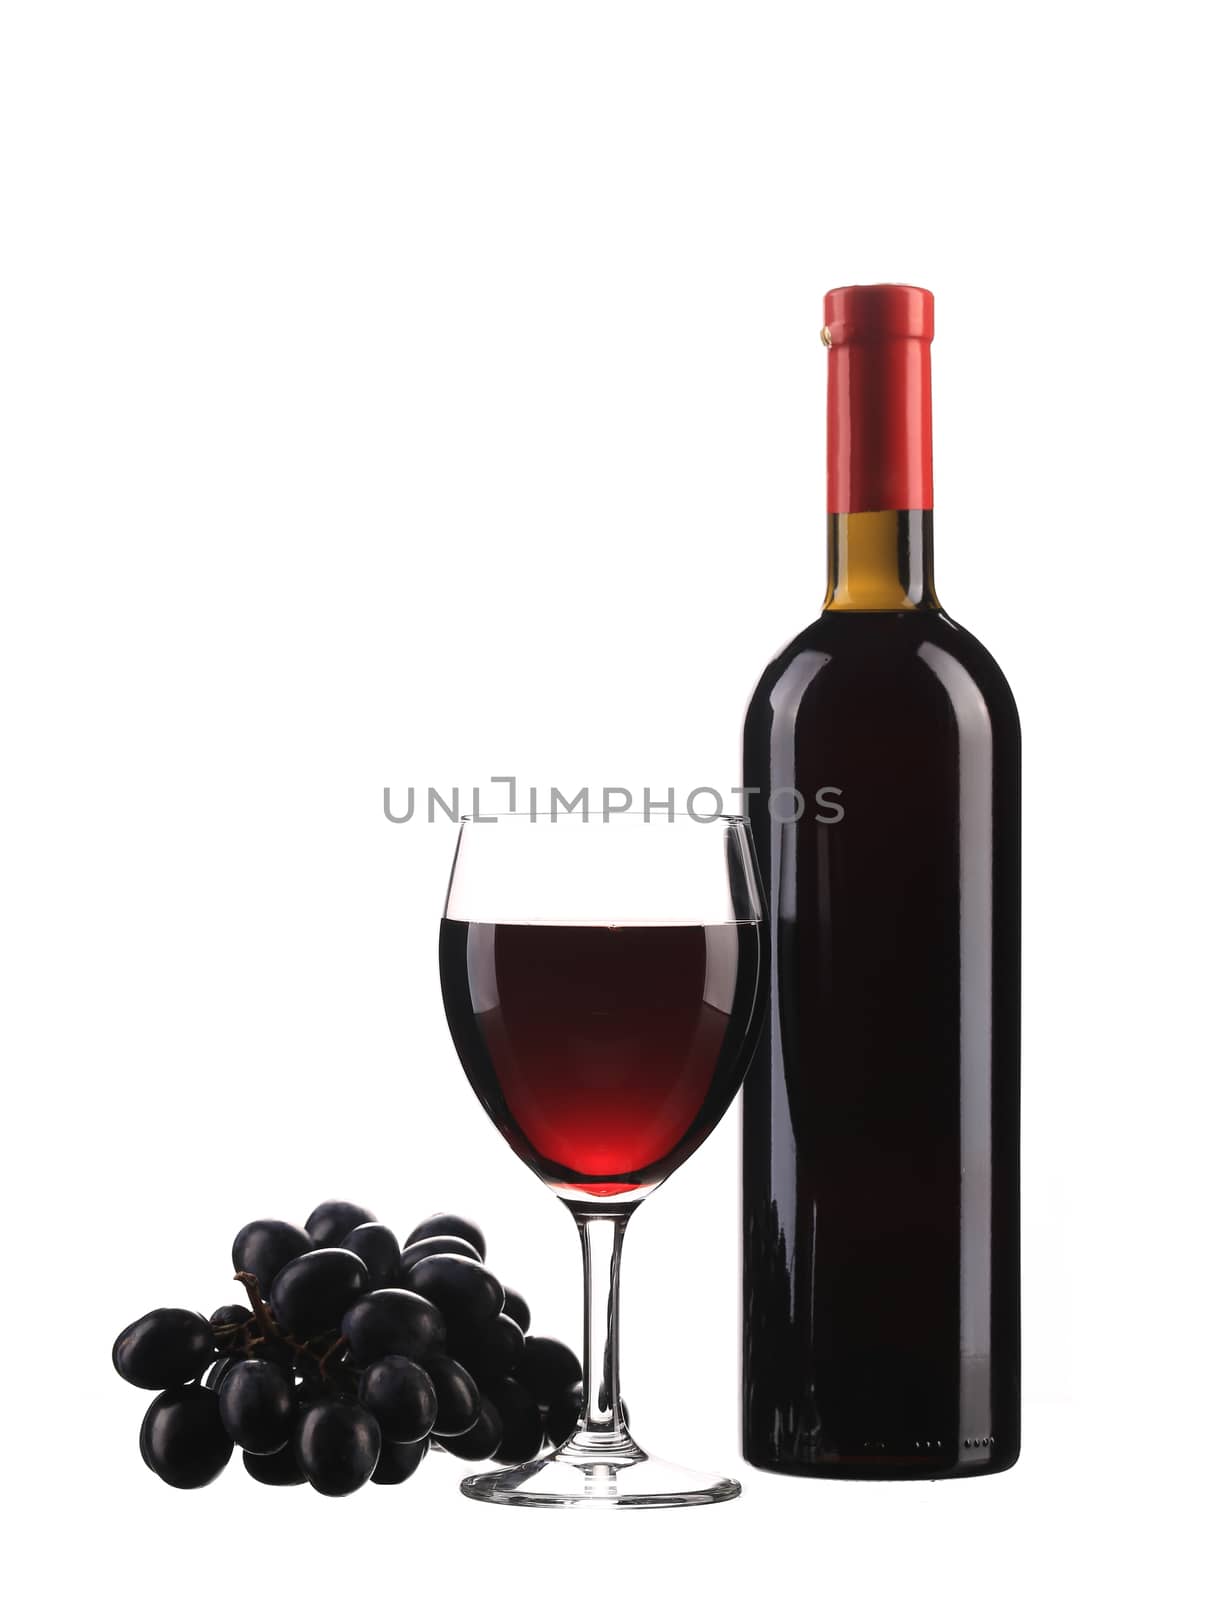 Red wine bottle and glass. Isolated on a white background.